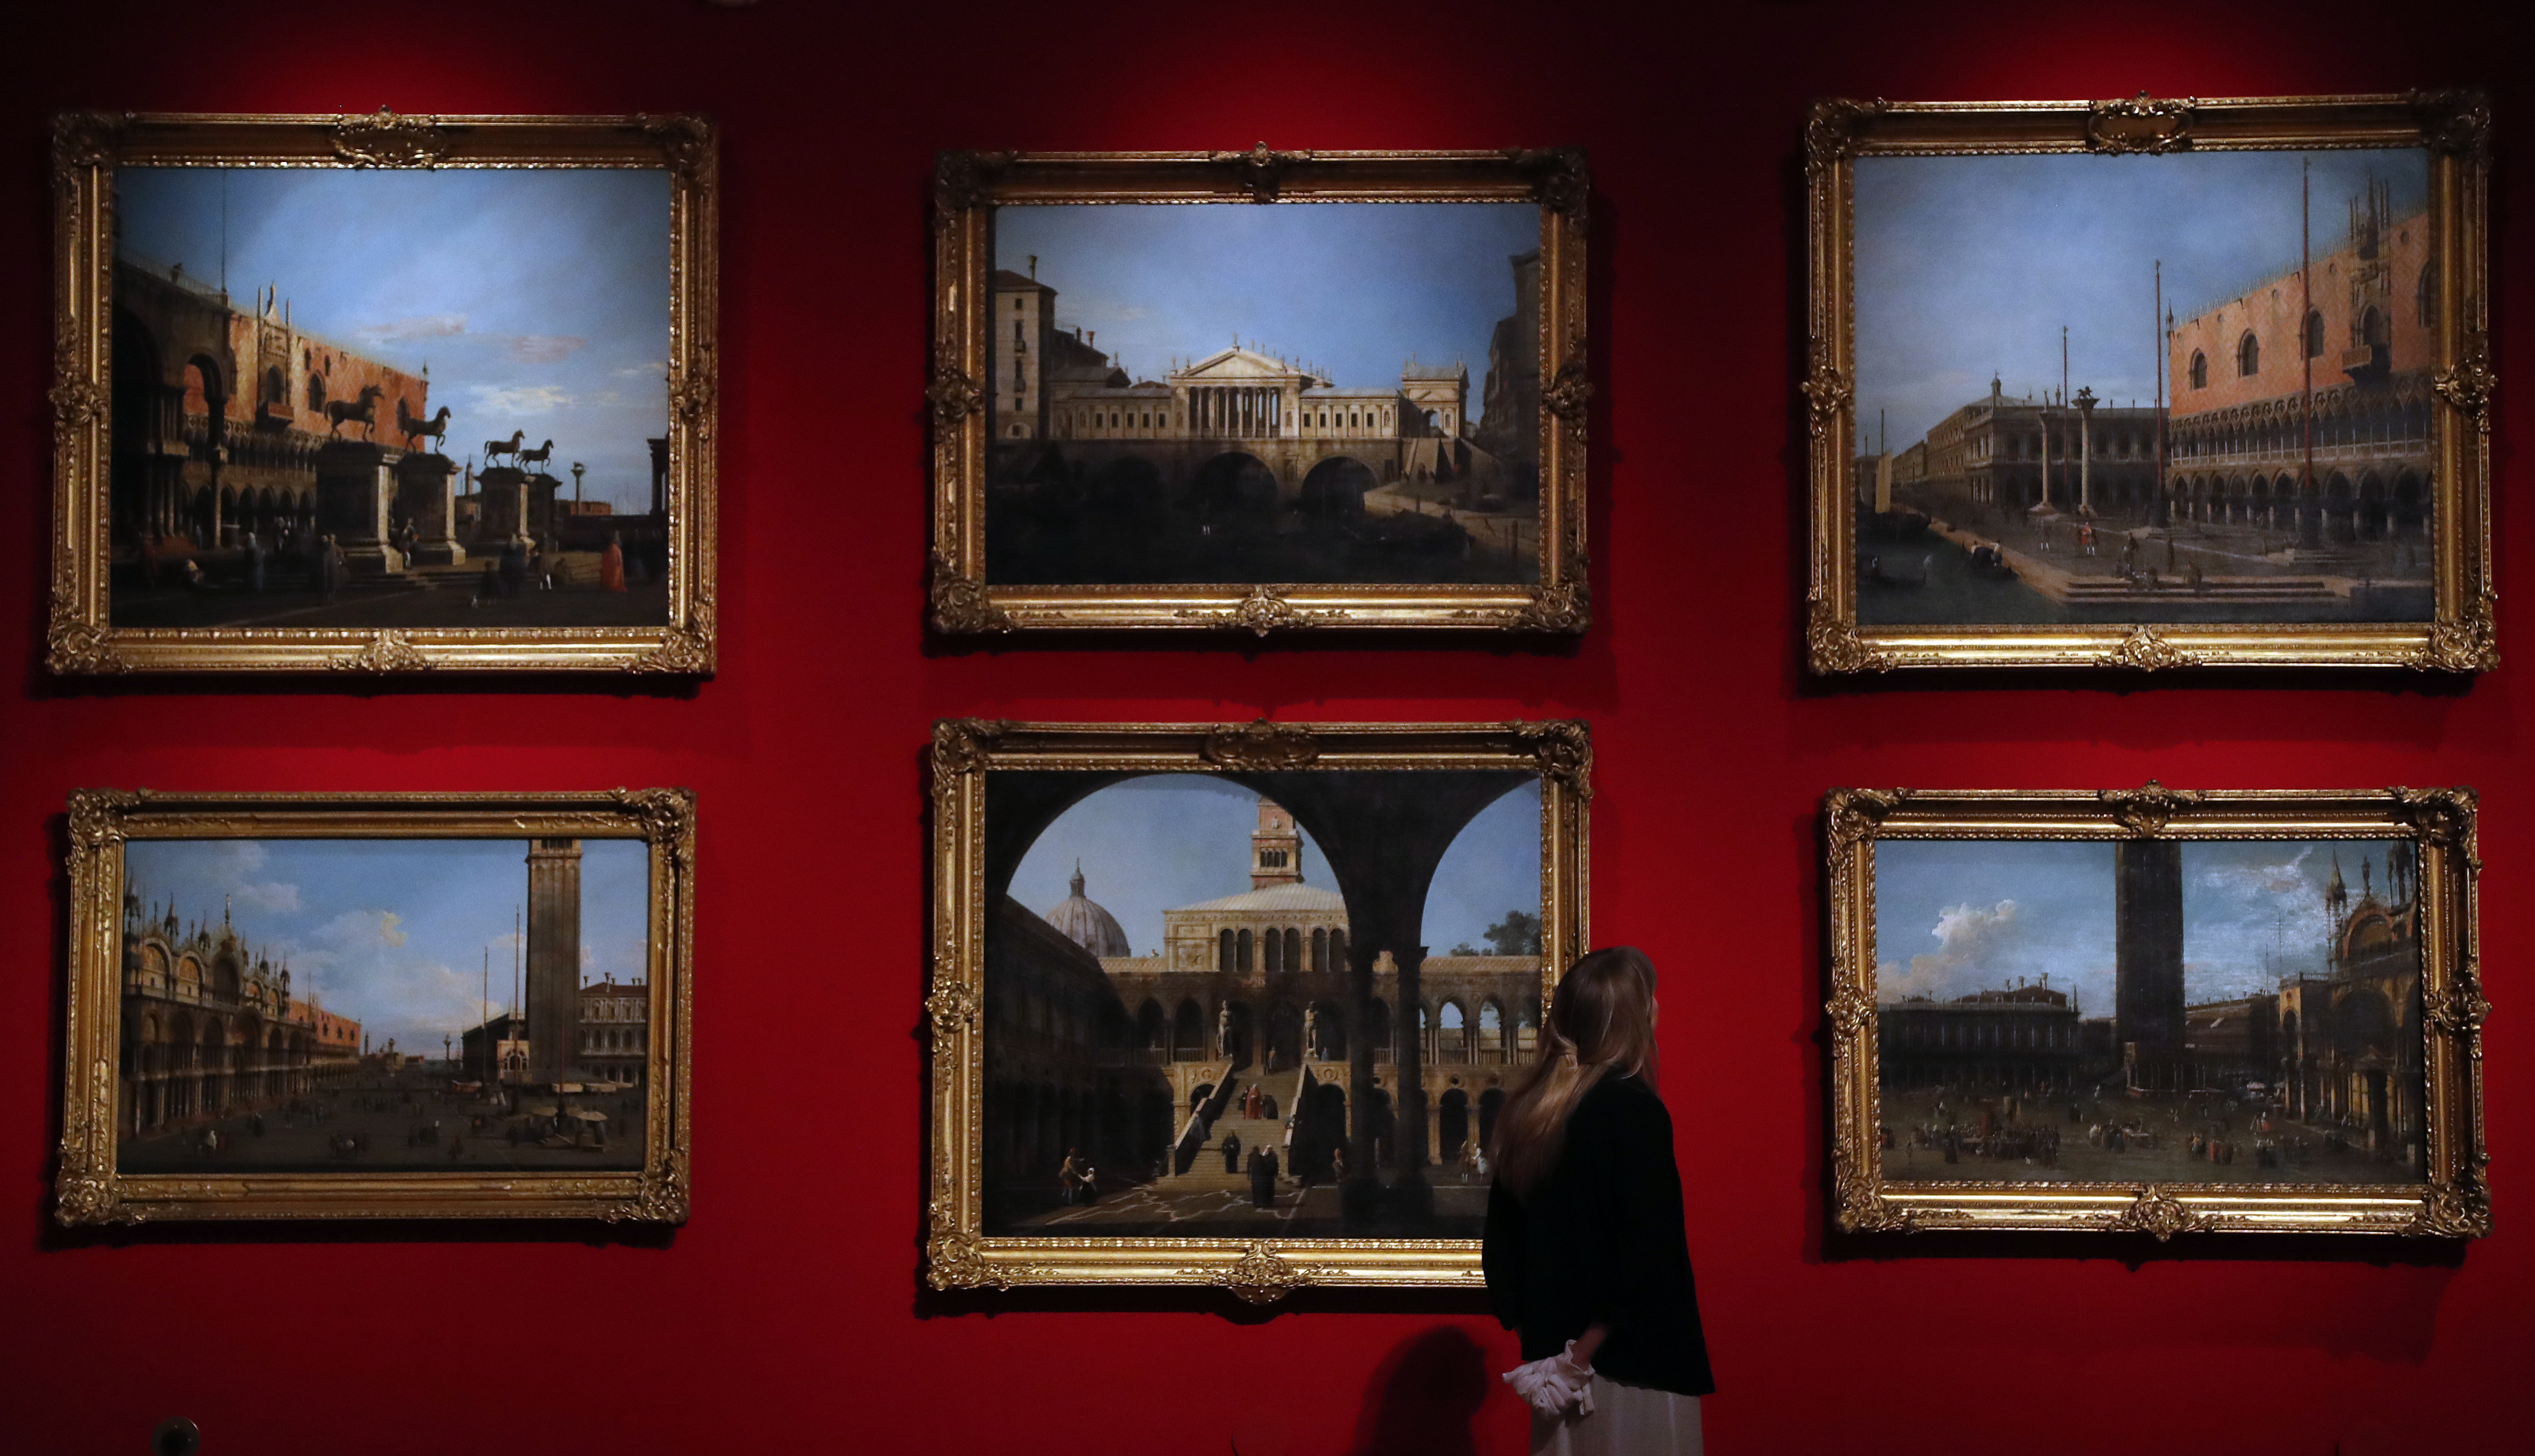 A woman looks at Canaletto's paintings of Venice views at the Queen's Gallery at Buckingham Palace in London, Thursday, May 18, 2017. A new exhibition reunites two of Canaletto's finest sets of paintings, displayed side by side for the first time in almost 40 years. Canaletto & the Art of Venice is opening on May 19, at The Queen's Gallery, Buckingham Palace.(AP Photo/Frank Augstein)